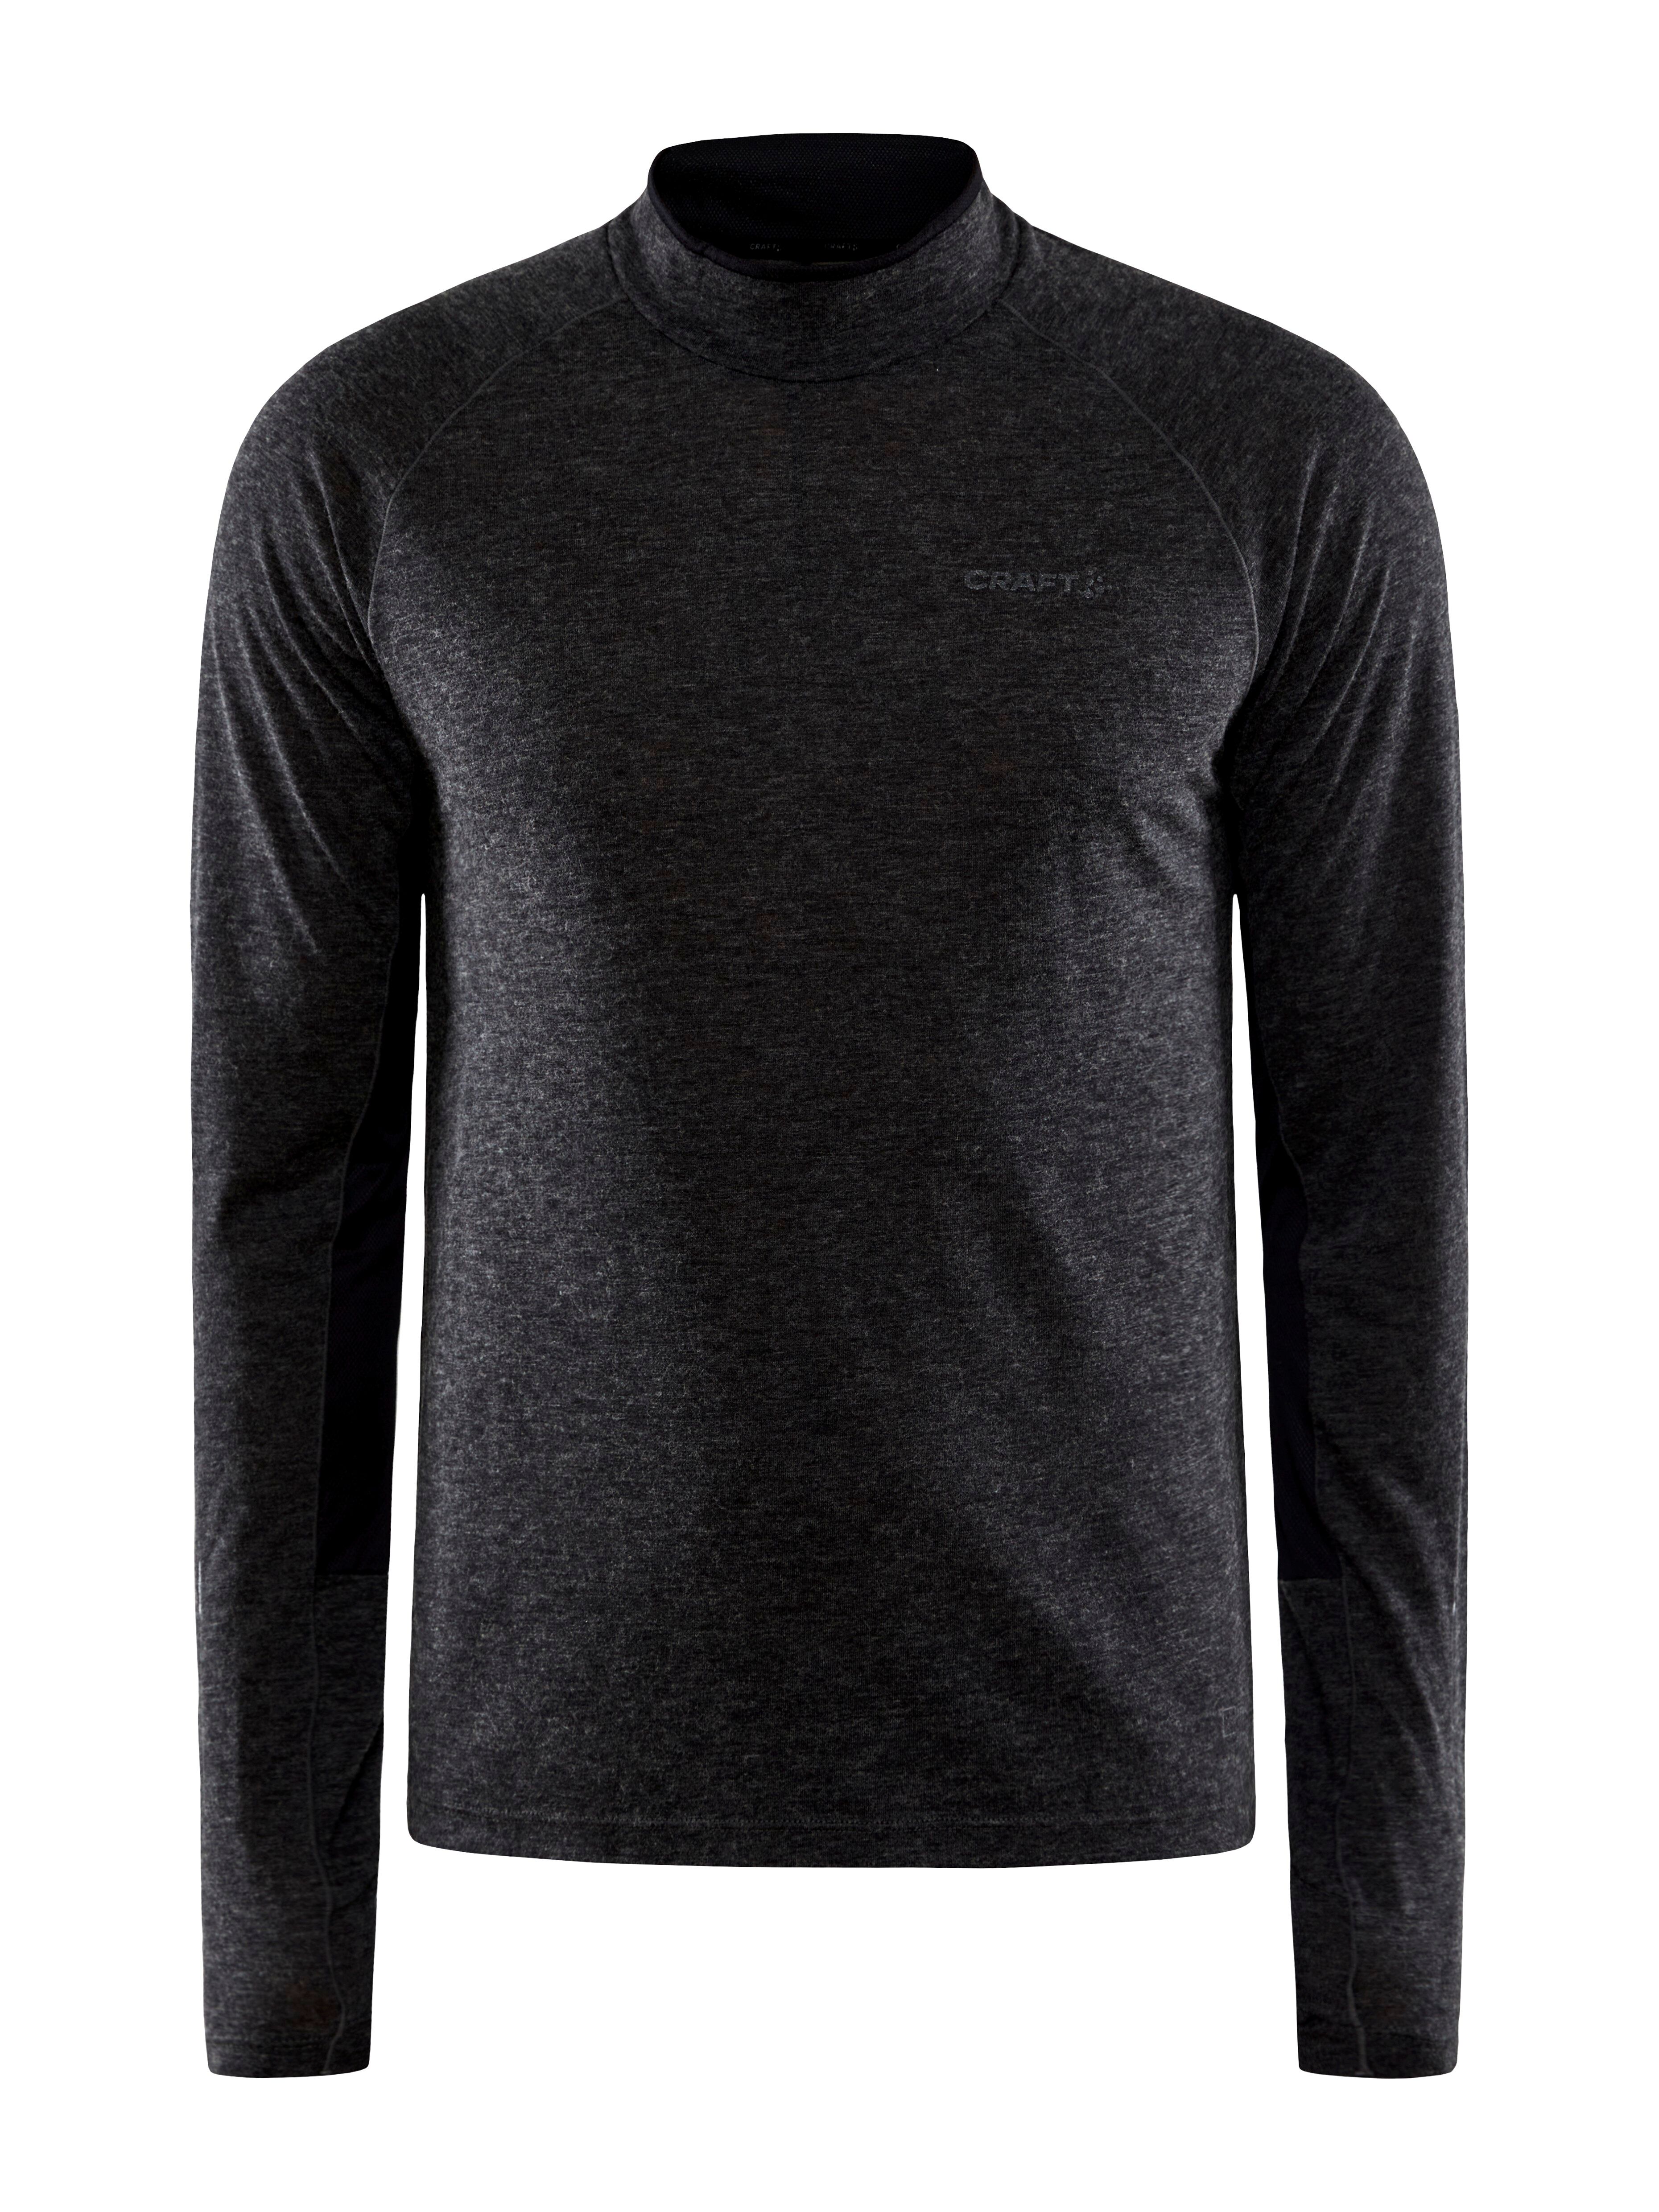 Craft Adv Subz Wool Ls Tee - Ropa interior - Hombre